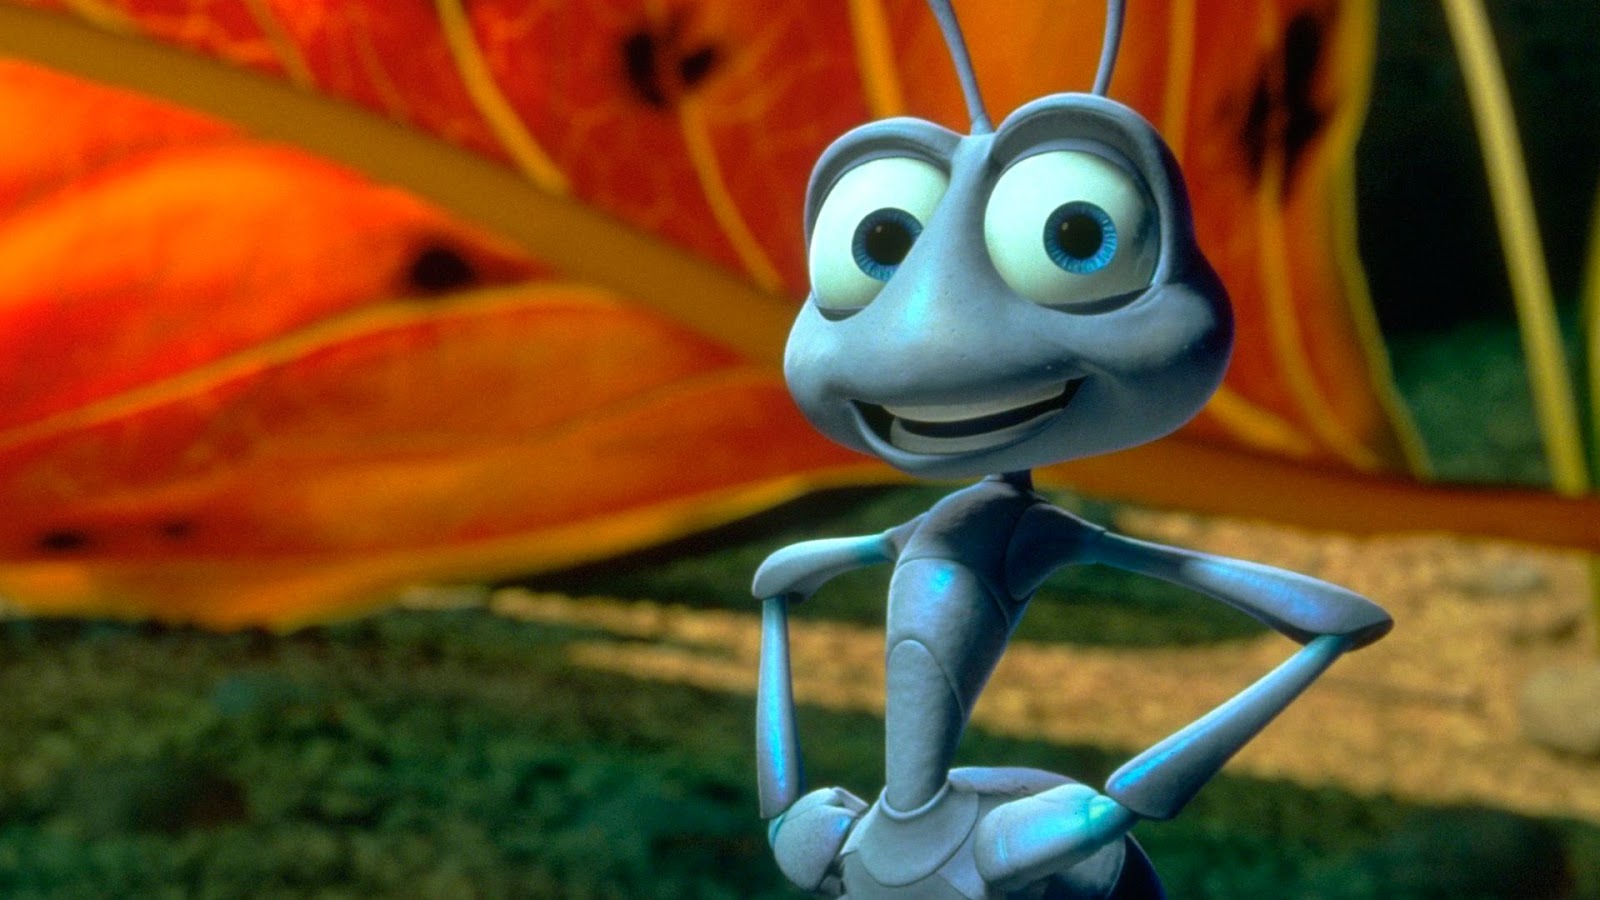 F This Movie!: Reserved Seating Ranks the Pixars: A BUG'S LIFE